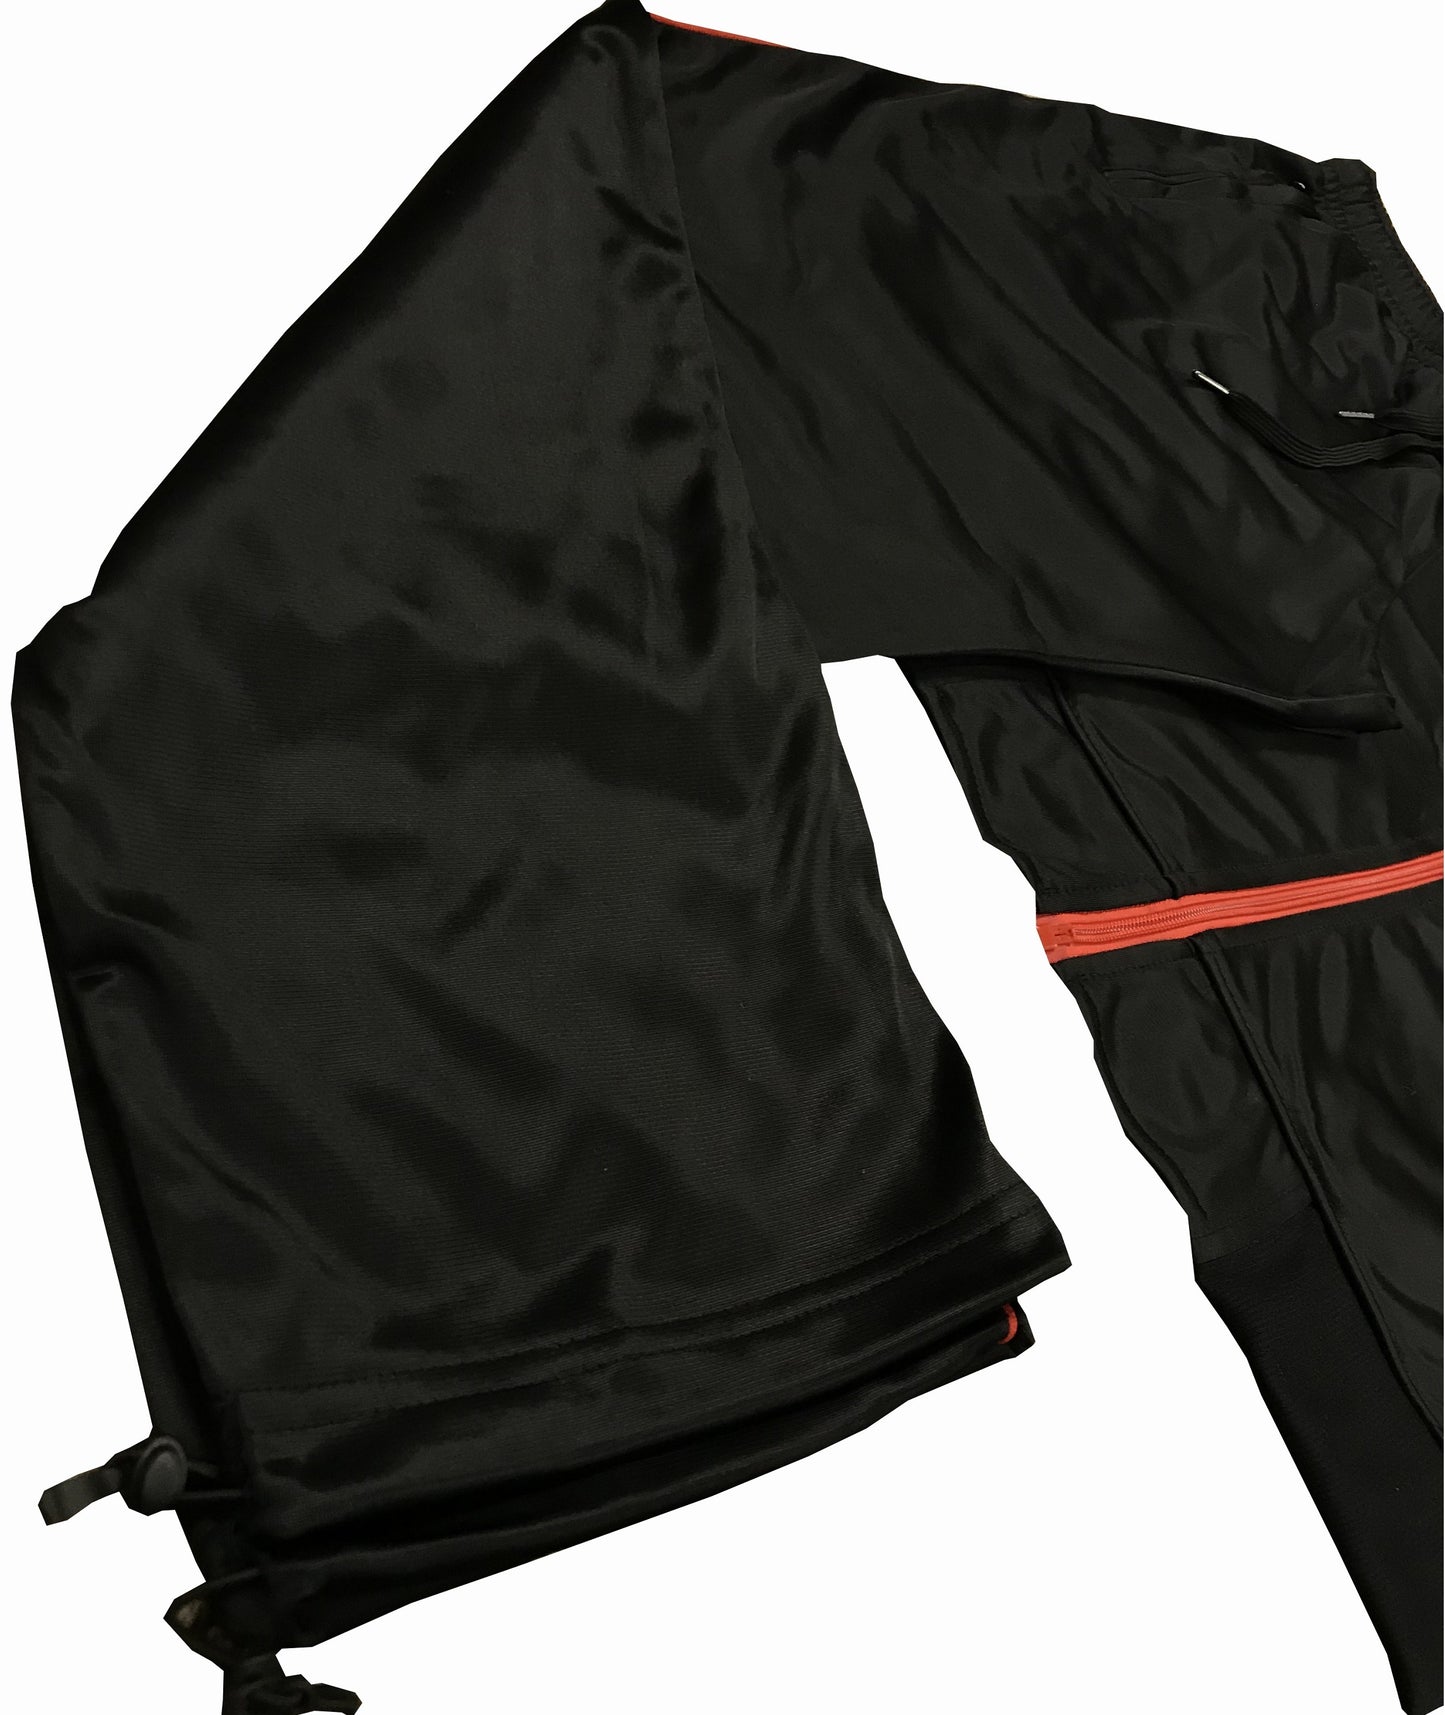 Royal Threads Canada Men Classic ActiveWear Spring TrackJacket TrackPants Tracksuit Outfit